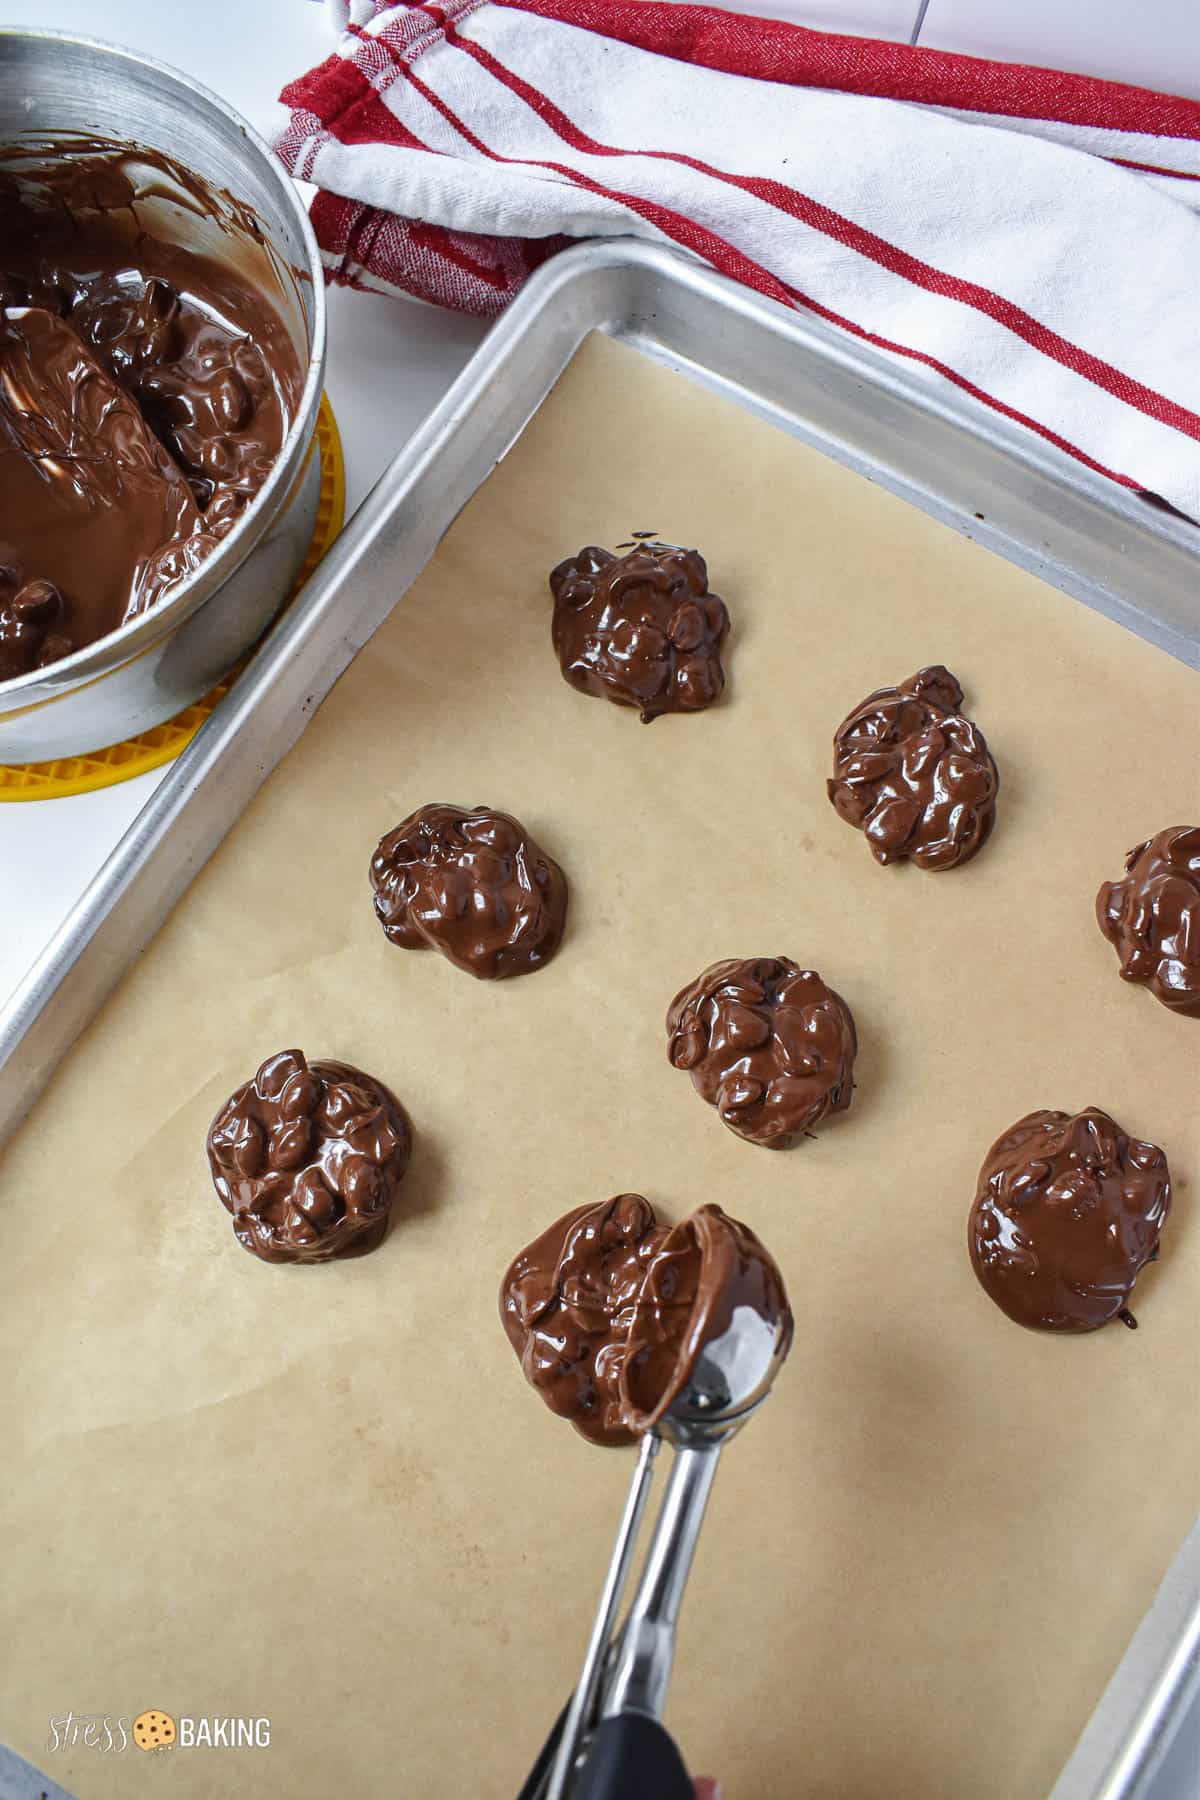 Chocolate covered peanuts being scooped onto a parchment paper-lined baking sheet